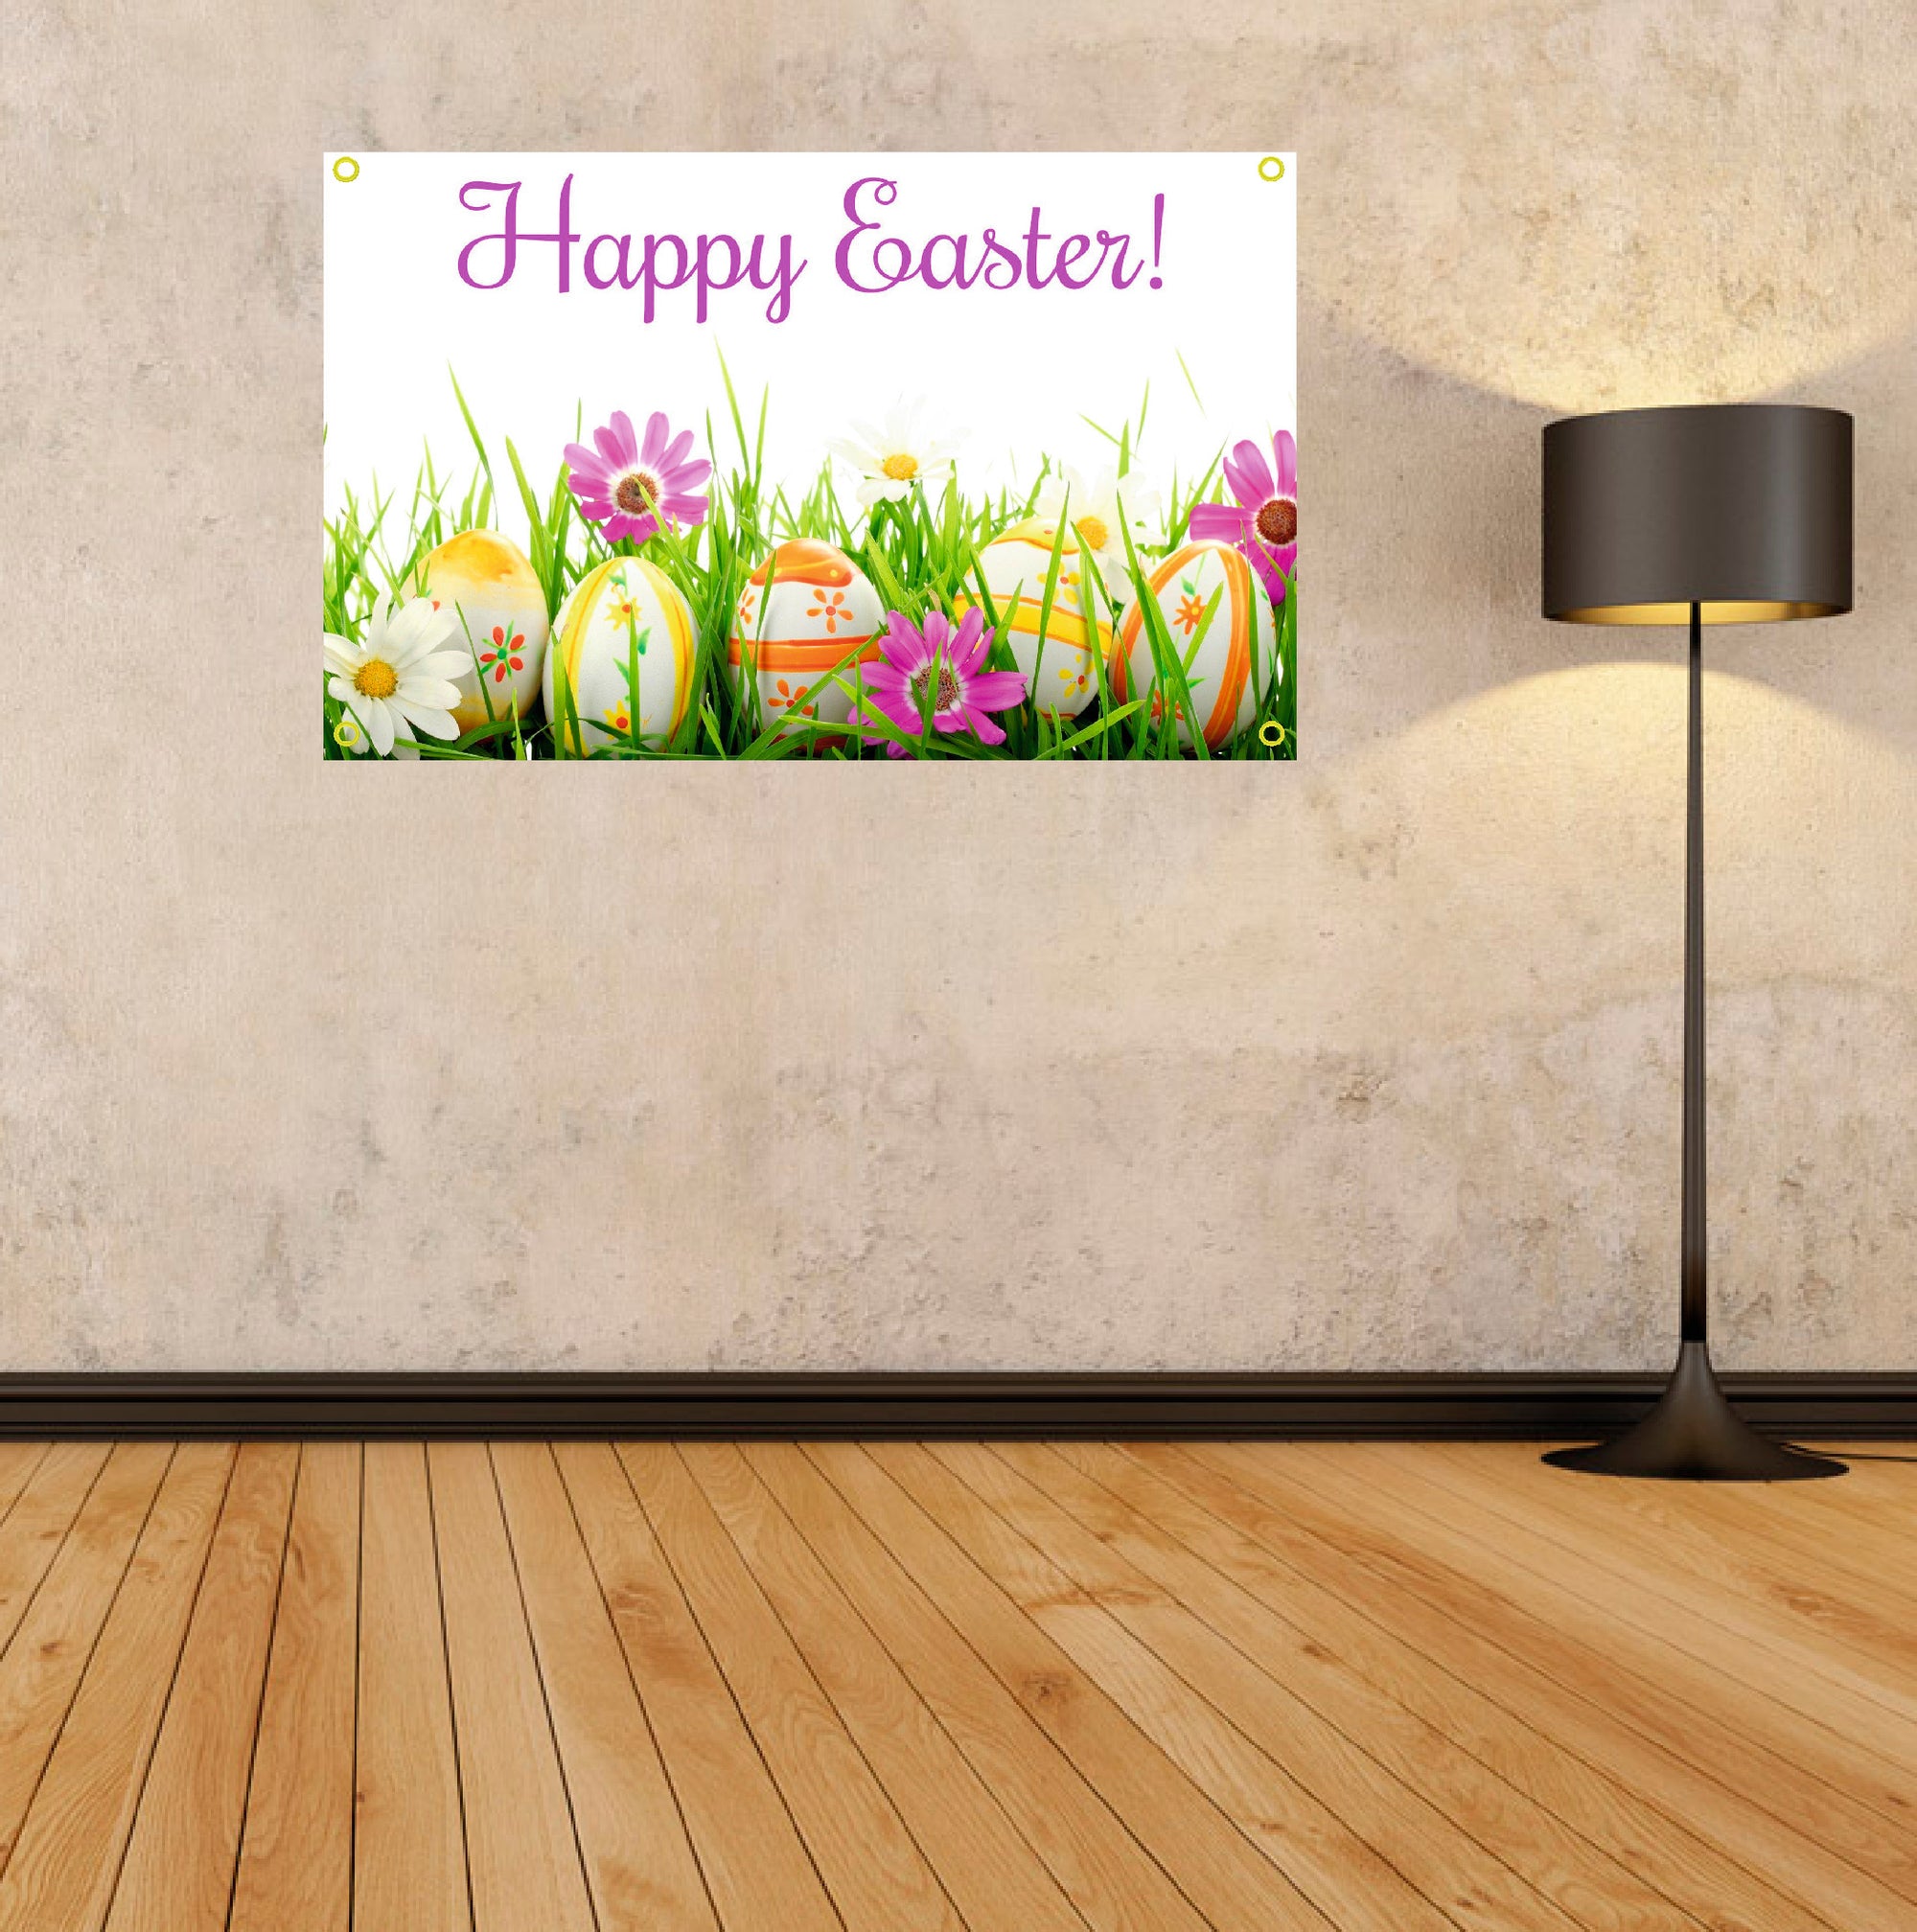 Happy Easter with decorated eggs banner